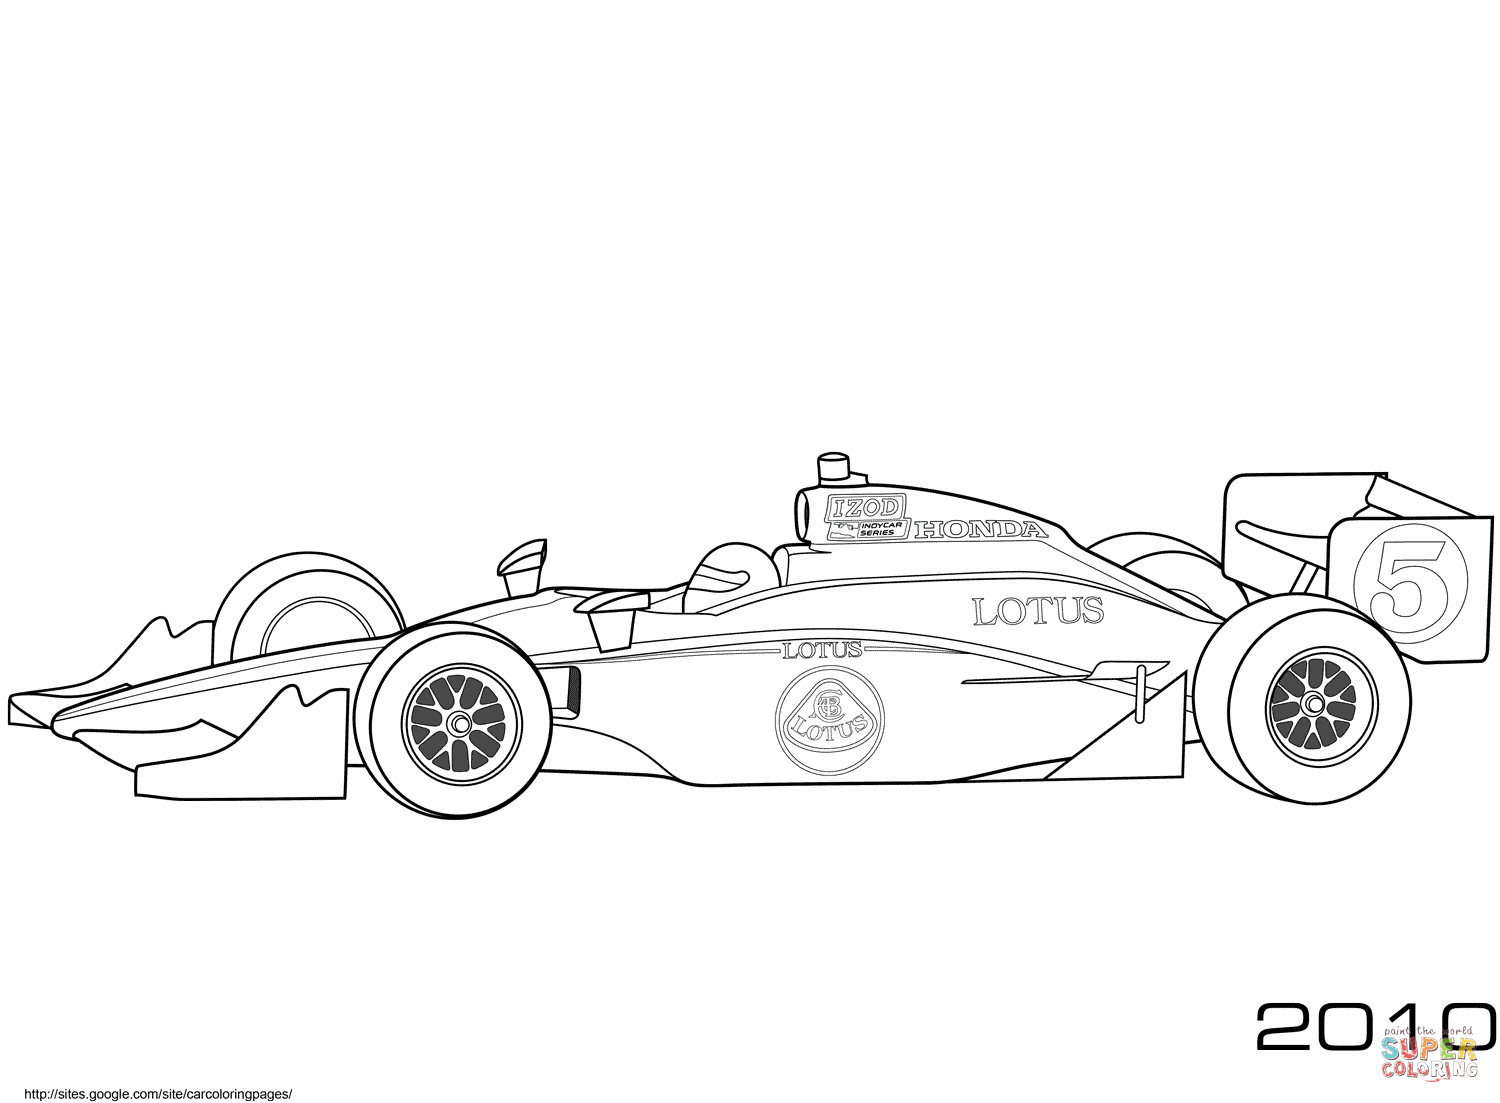 Blank Race Car Coloring Pages Throughout Blank Race Car Templates